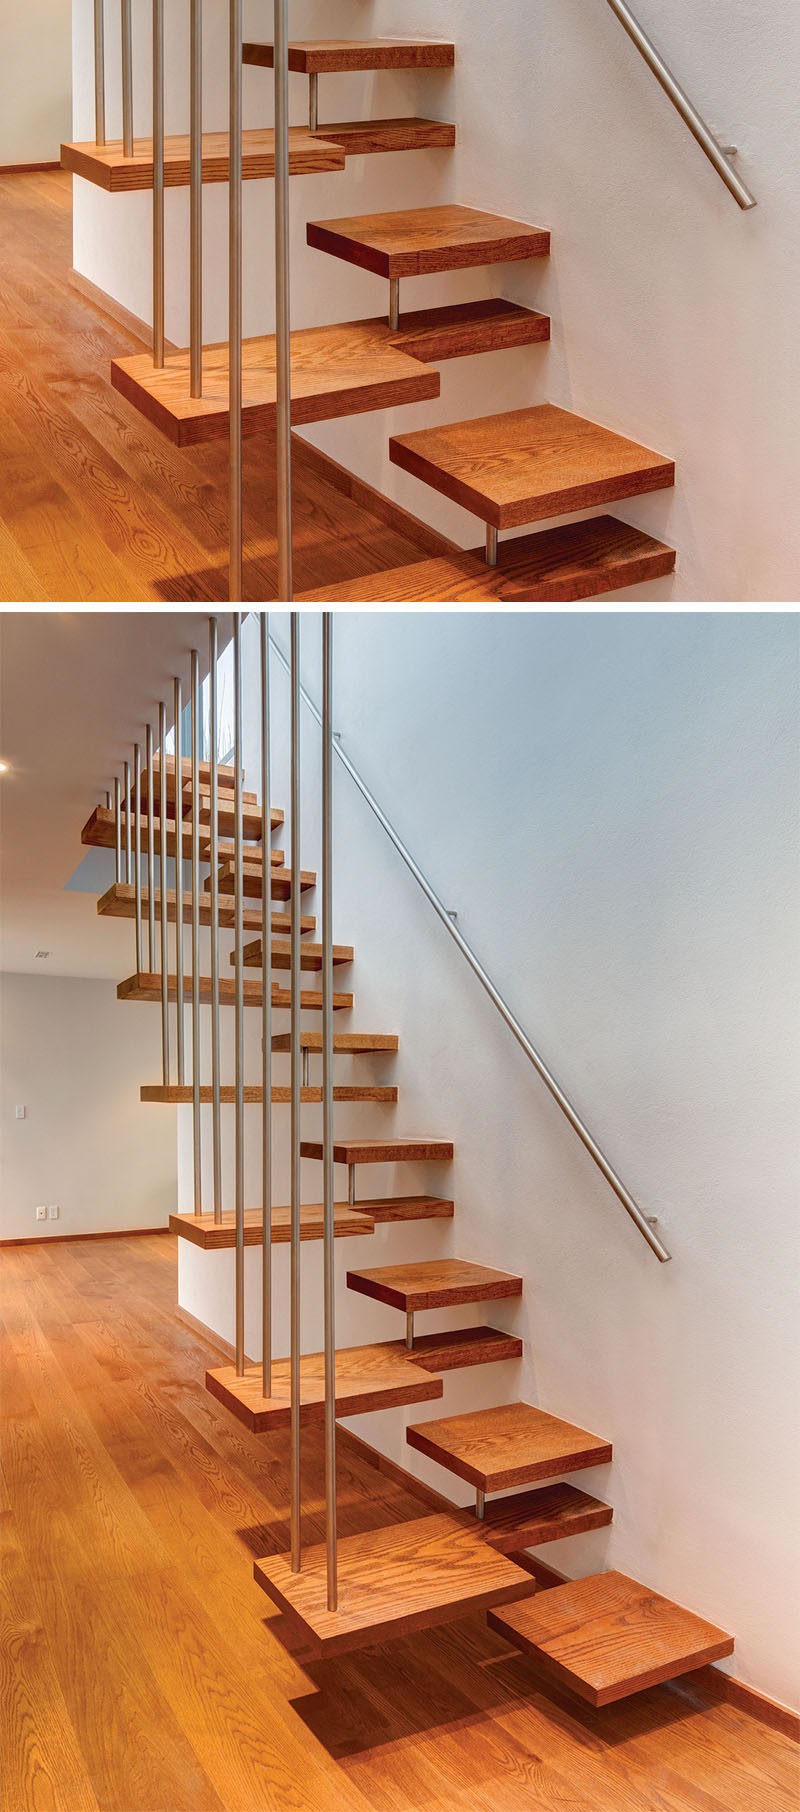 18 Examples Of Stair Details To Inspire You // If you're not careful, these wooden stairs could be a bit confusing.